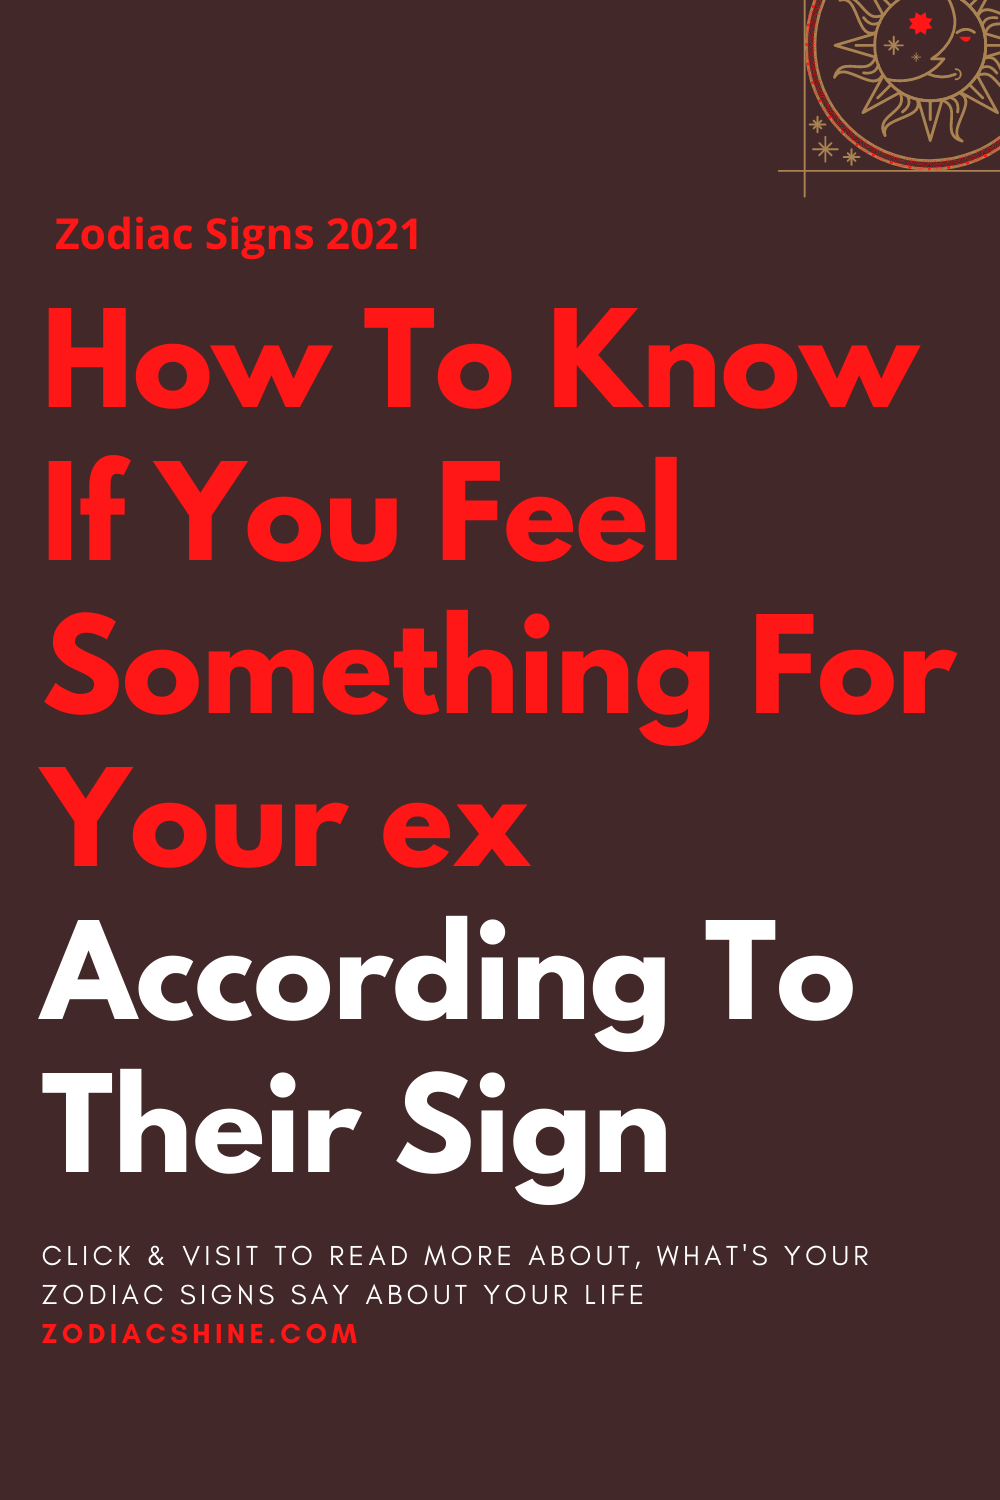 How To Know If You Feel Something For Your ex According To Their Sign